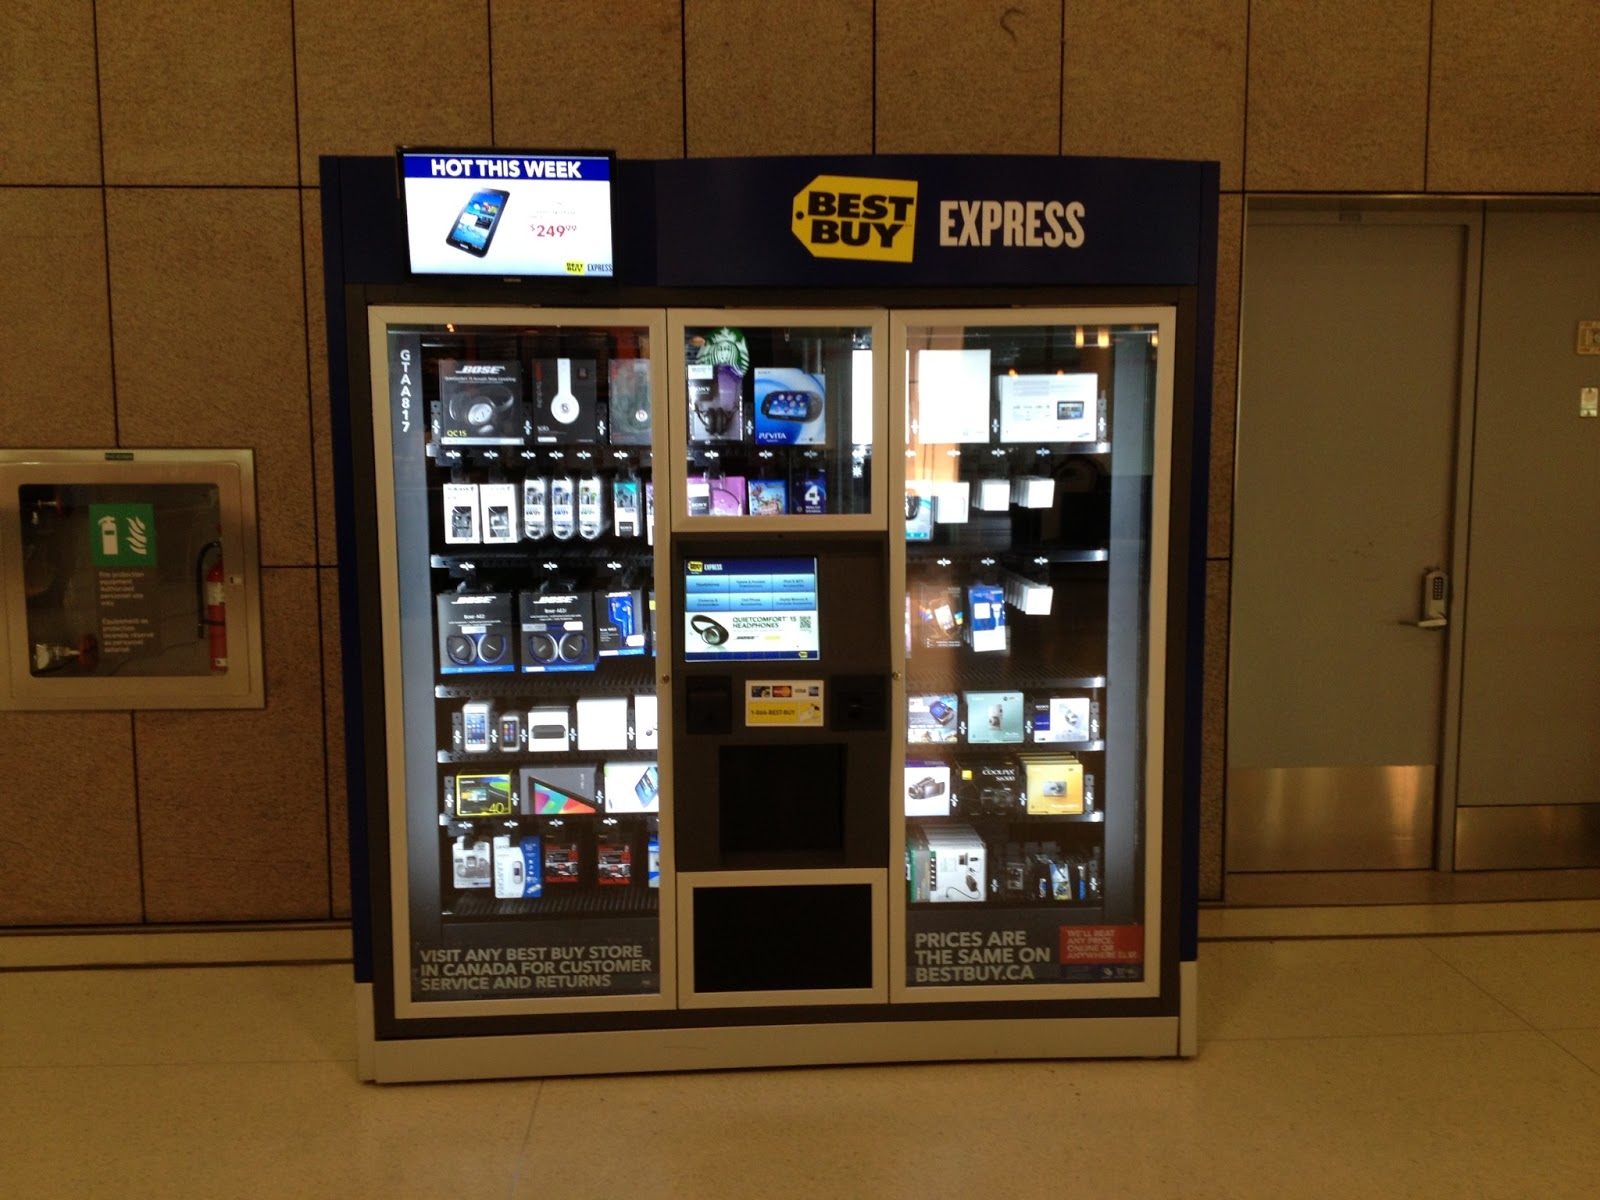 Interesting Places and Events: Best Buy Express Vending Machine Is Amazing